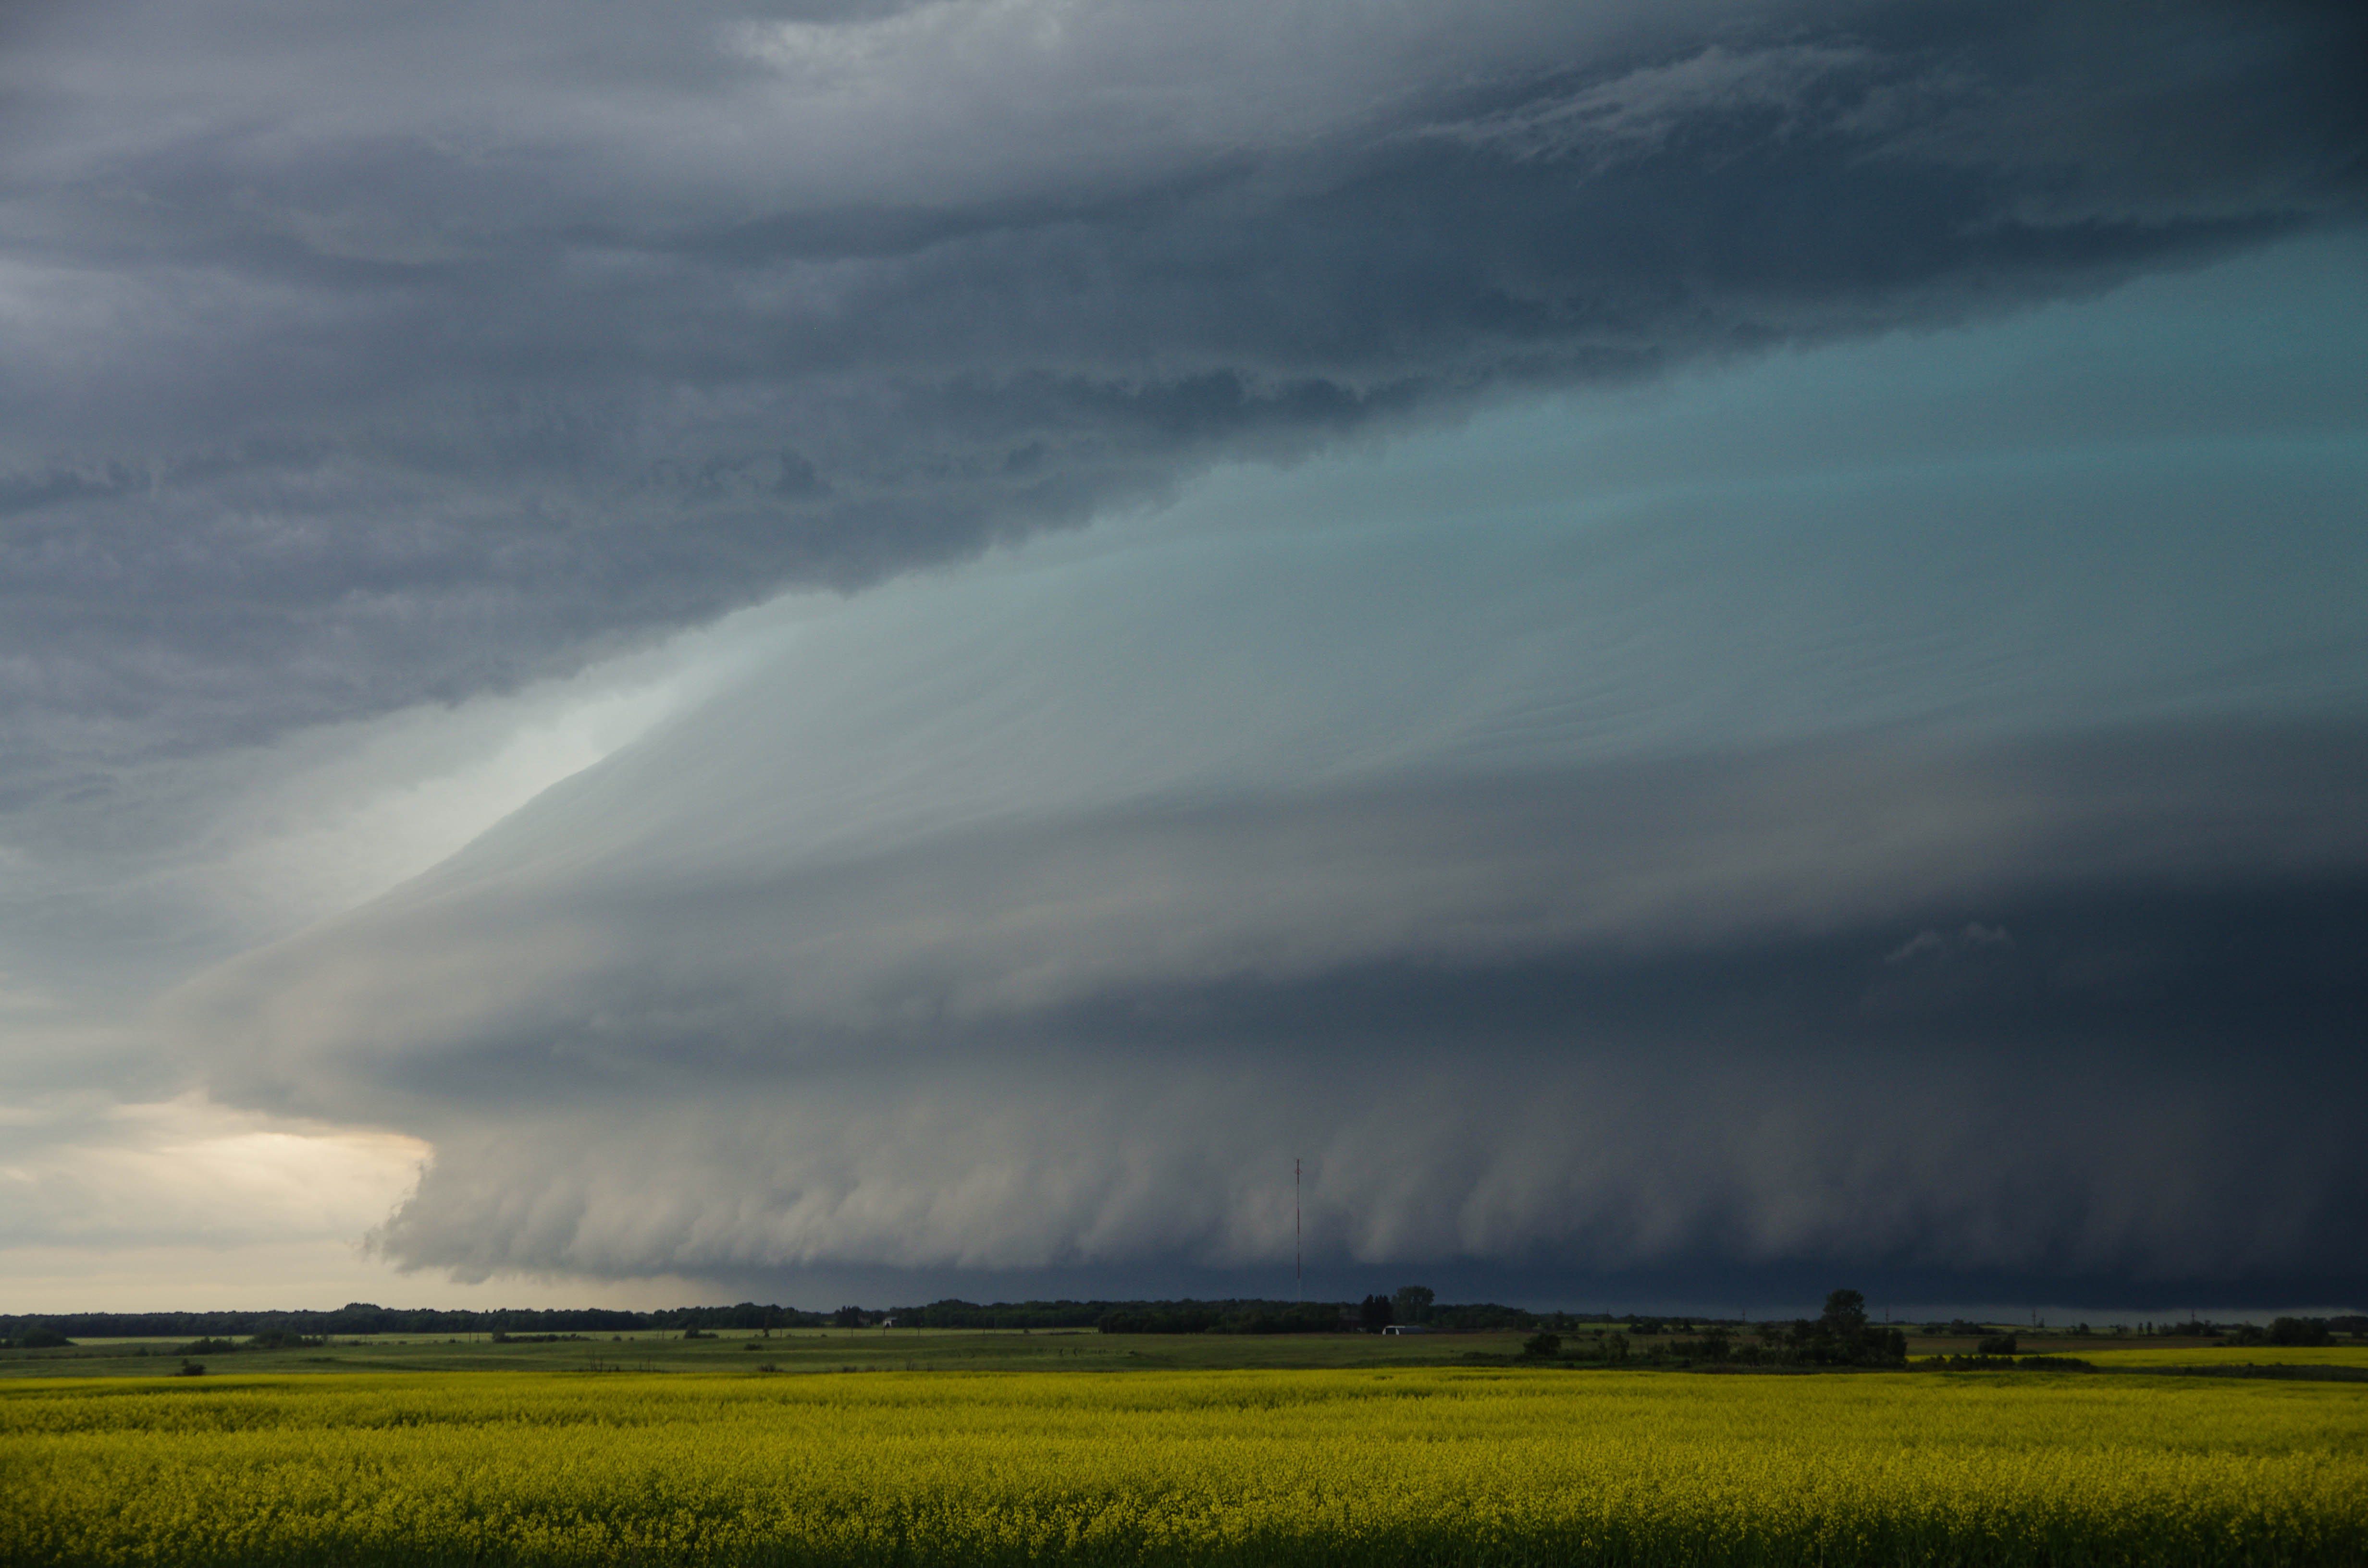 Ground-scraping shelf cloud as we initially approached the storm north of Ninette.